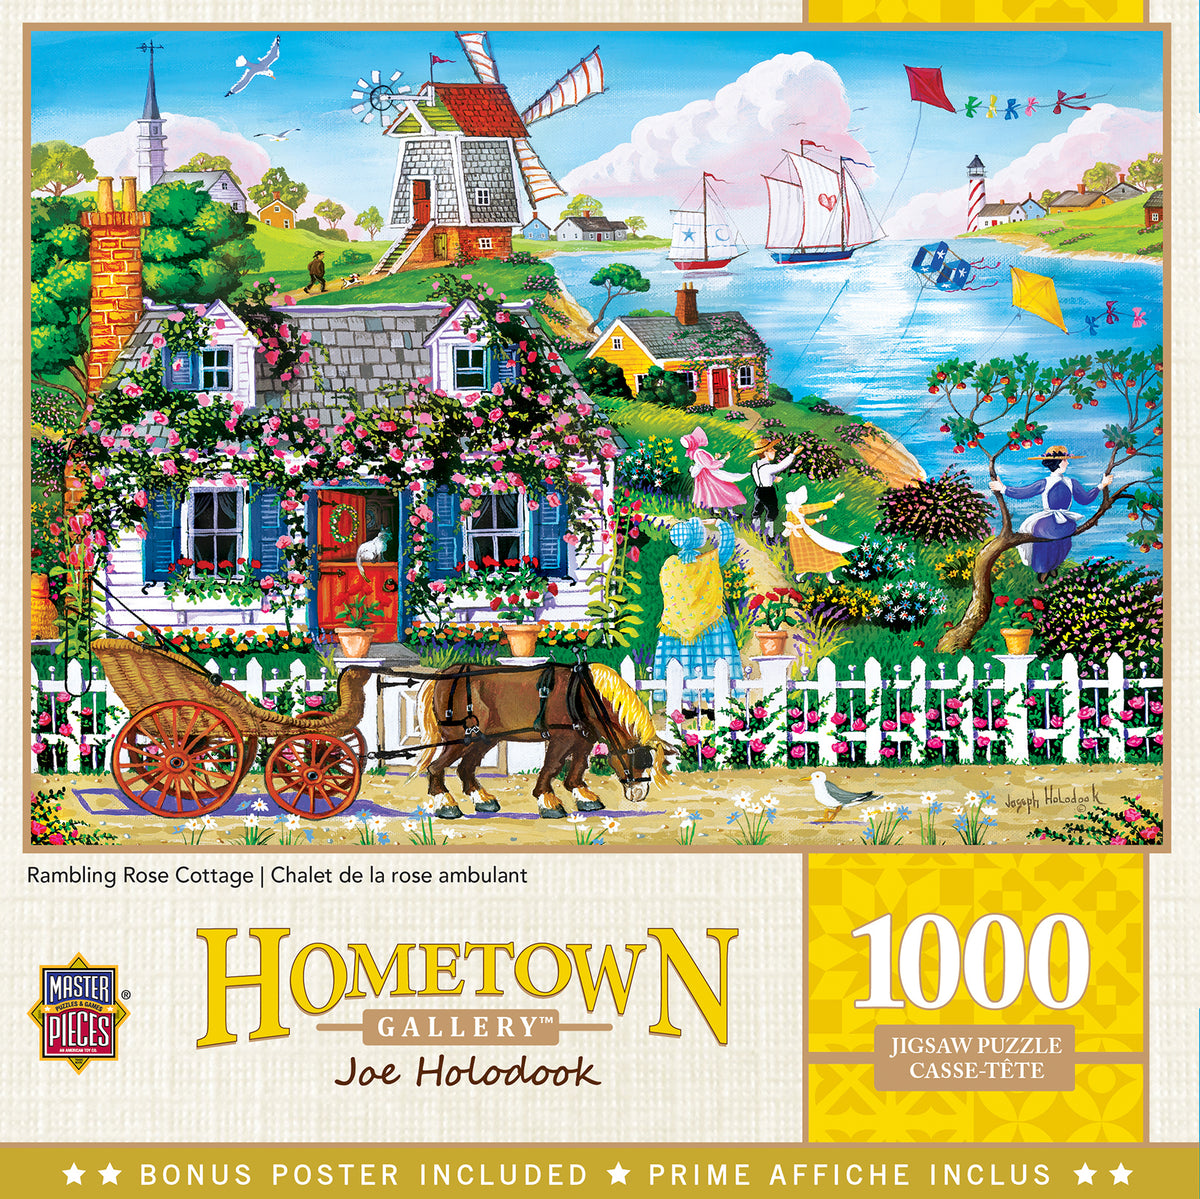 Masterpieces Hometown Gallery Rambling Rose Cottage 1000 Piece Jigsaw